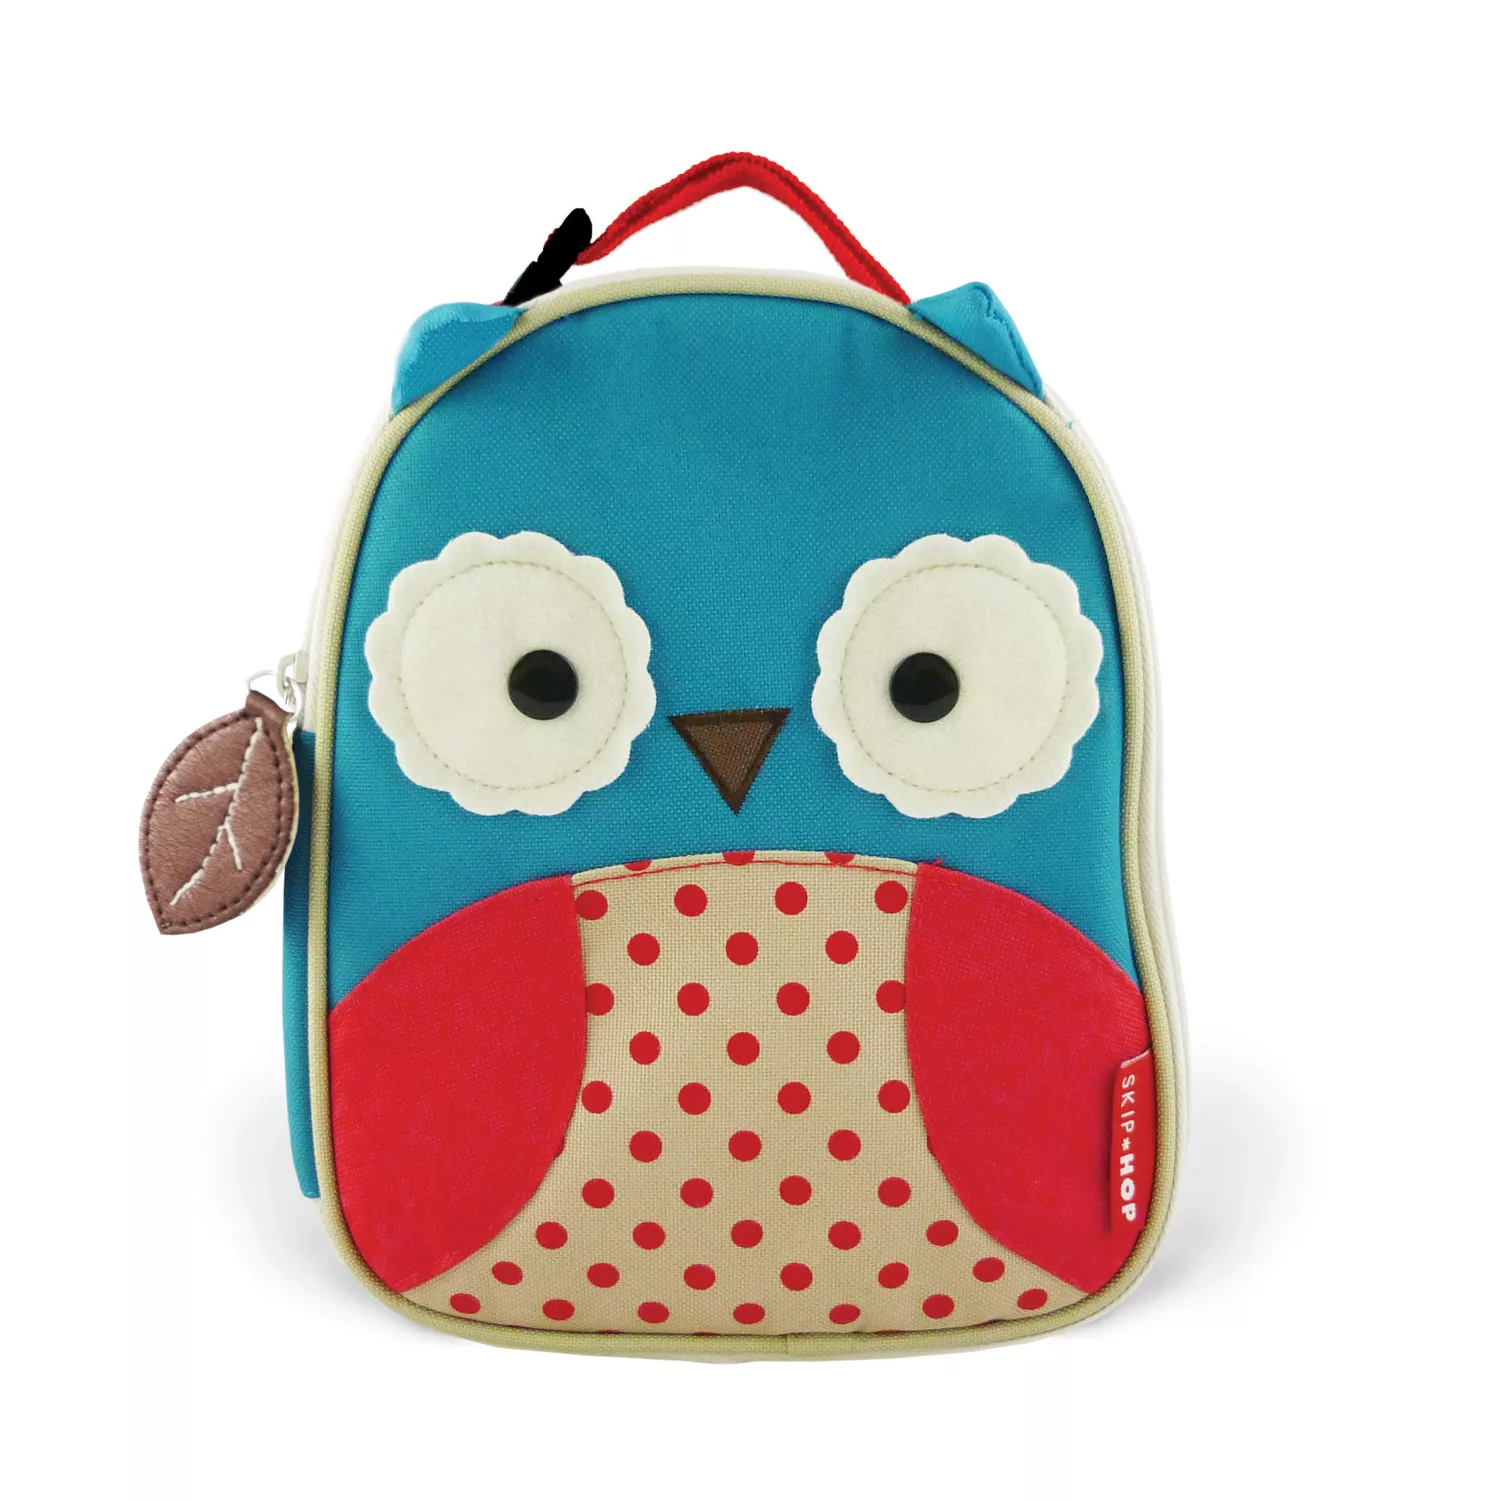 SkipHop Zoo Lunchie Bags